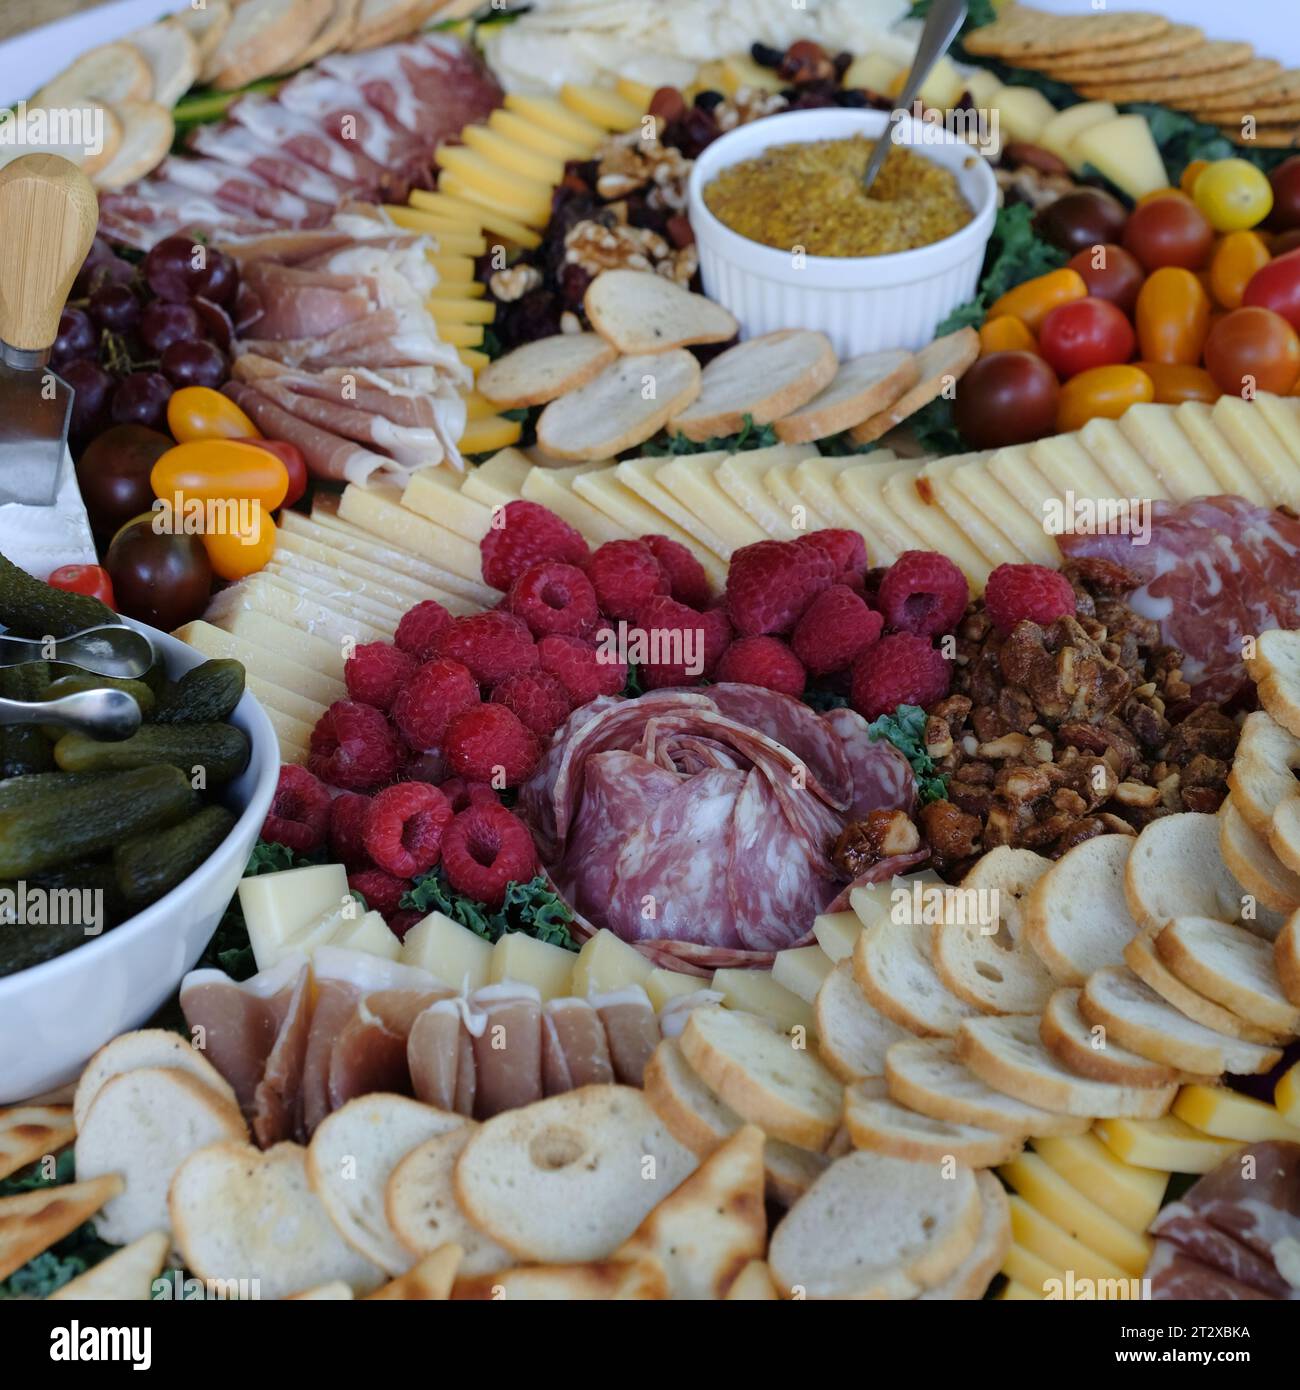 A festive platter with a variety of cured meats, artisanal cheeses, and crackers Stock Photo